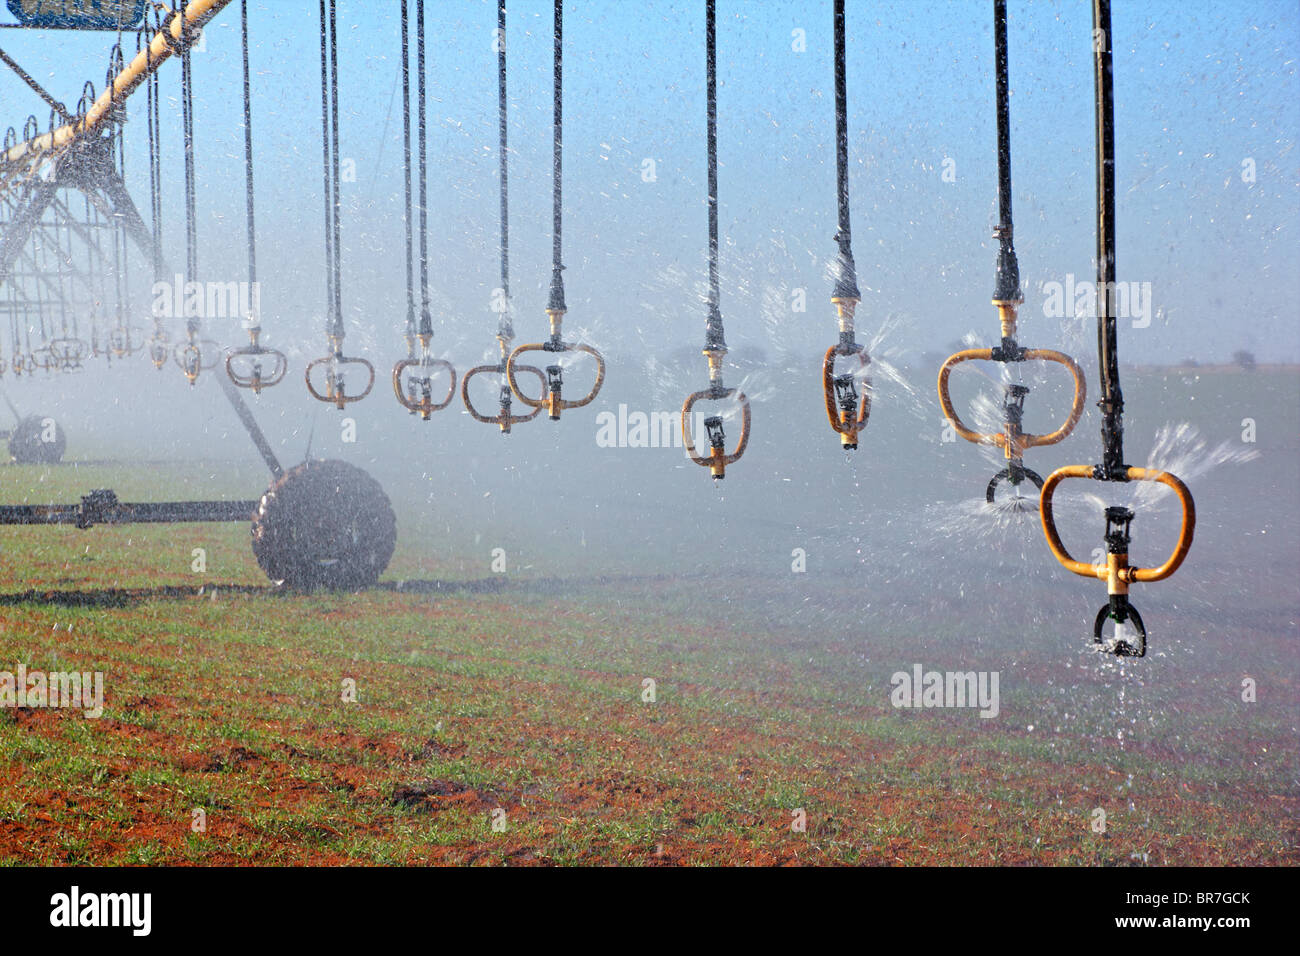 Center pivot crop irrigation system with water sprinklers Stock Photo